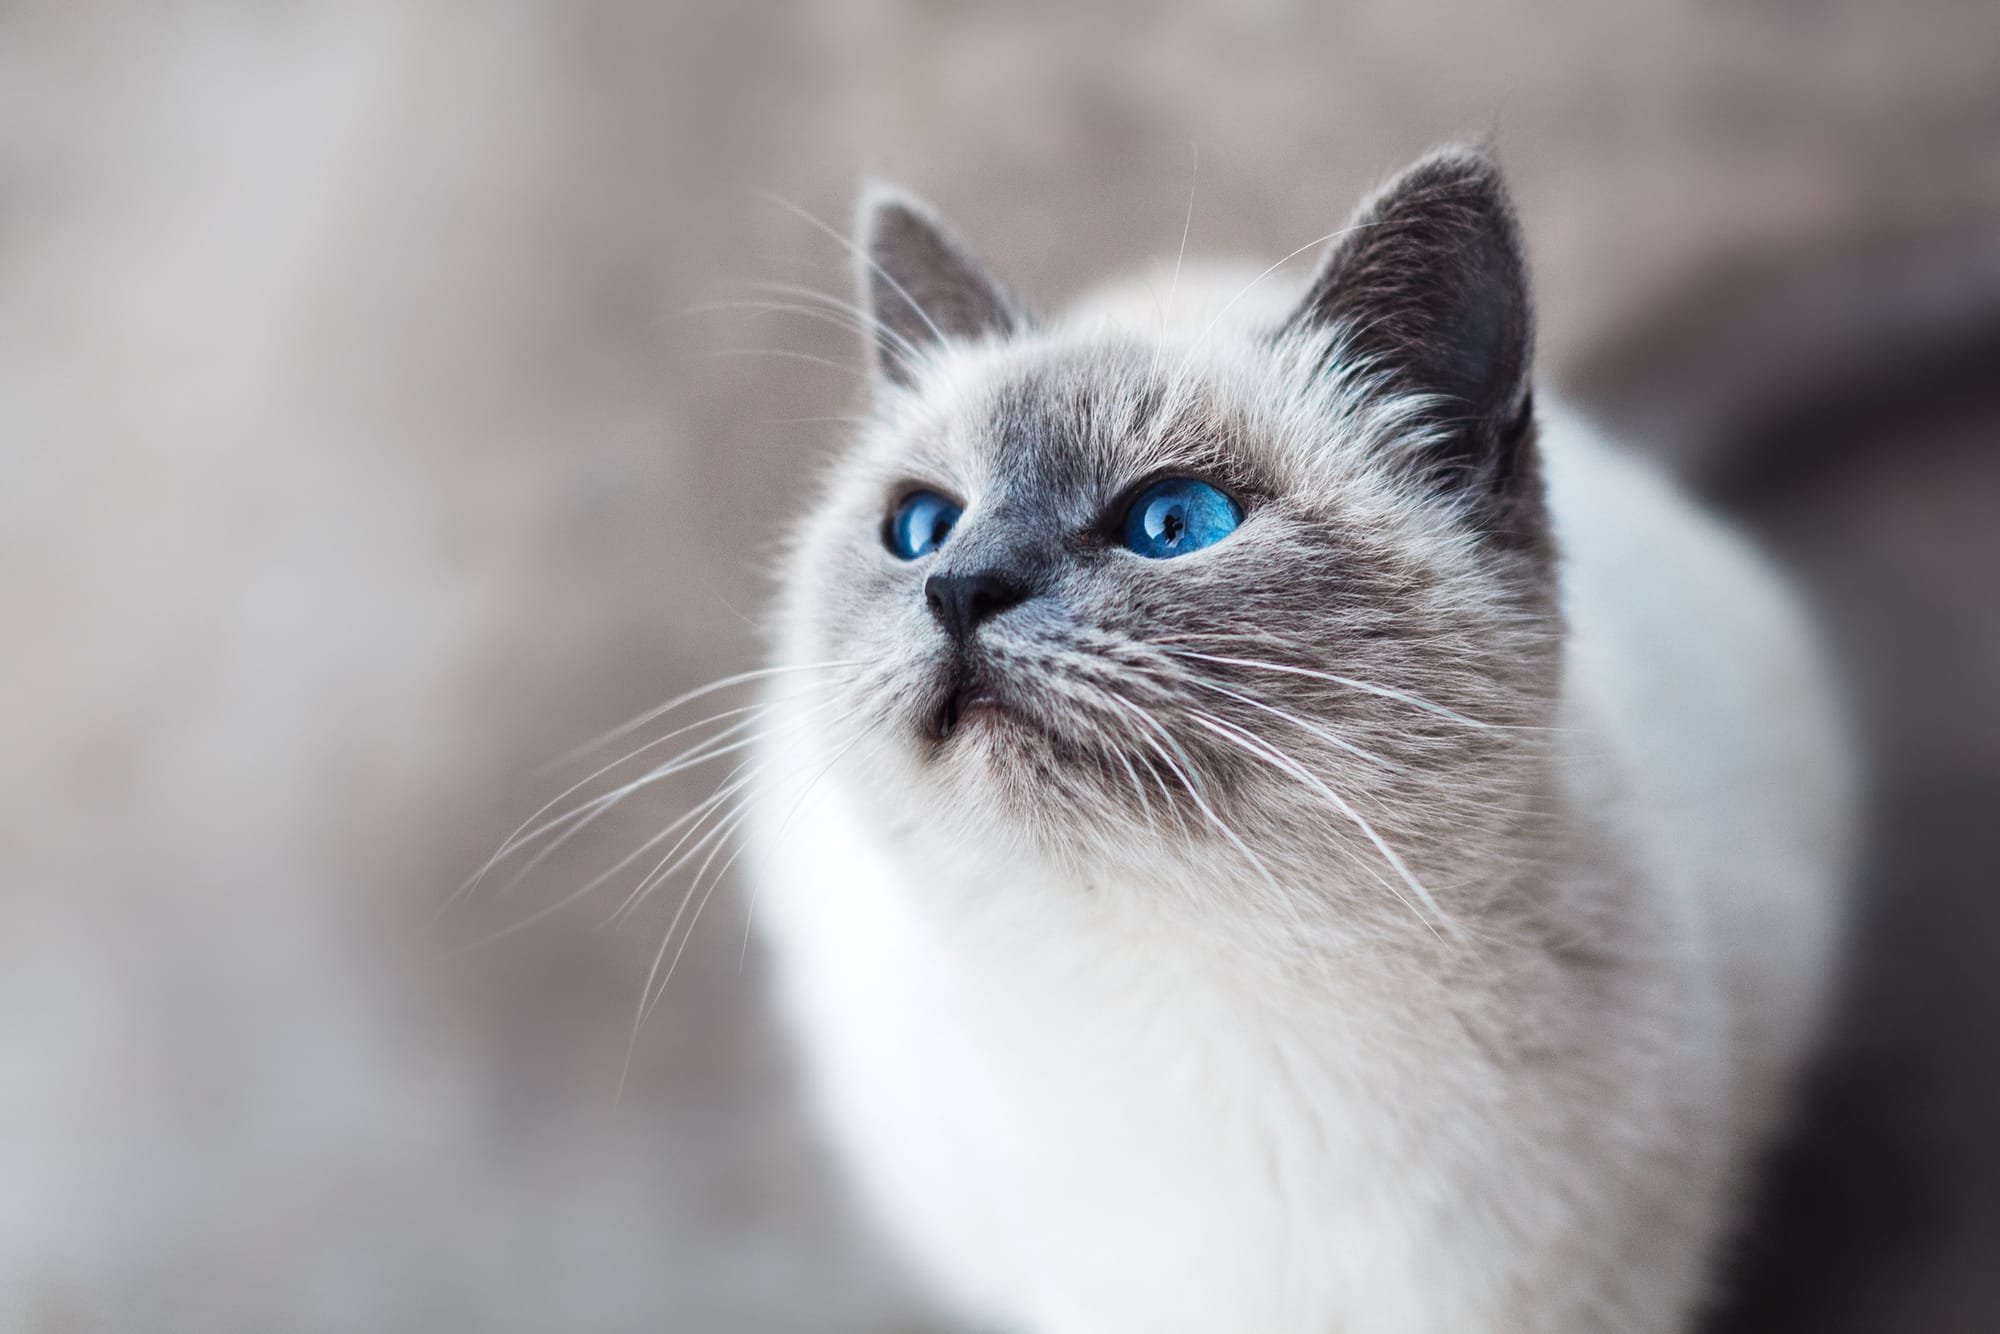 5 Health Tips Every Cat Owner Should Know